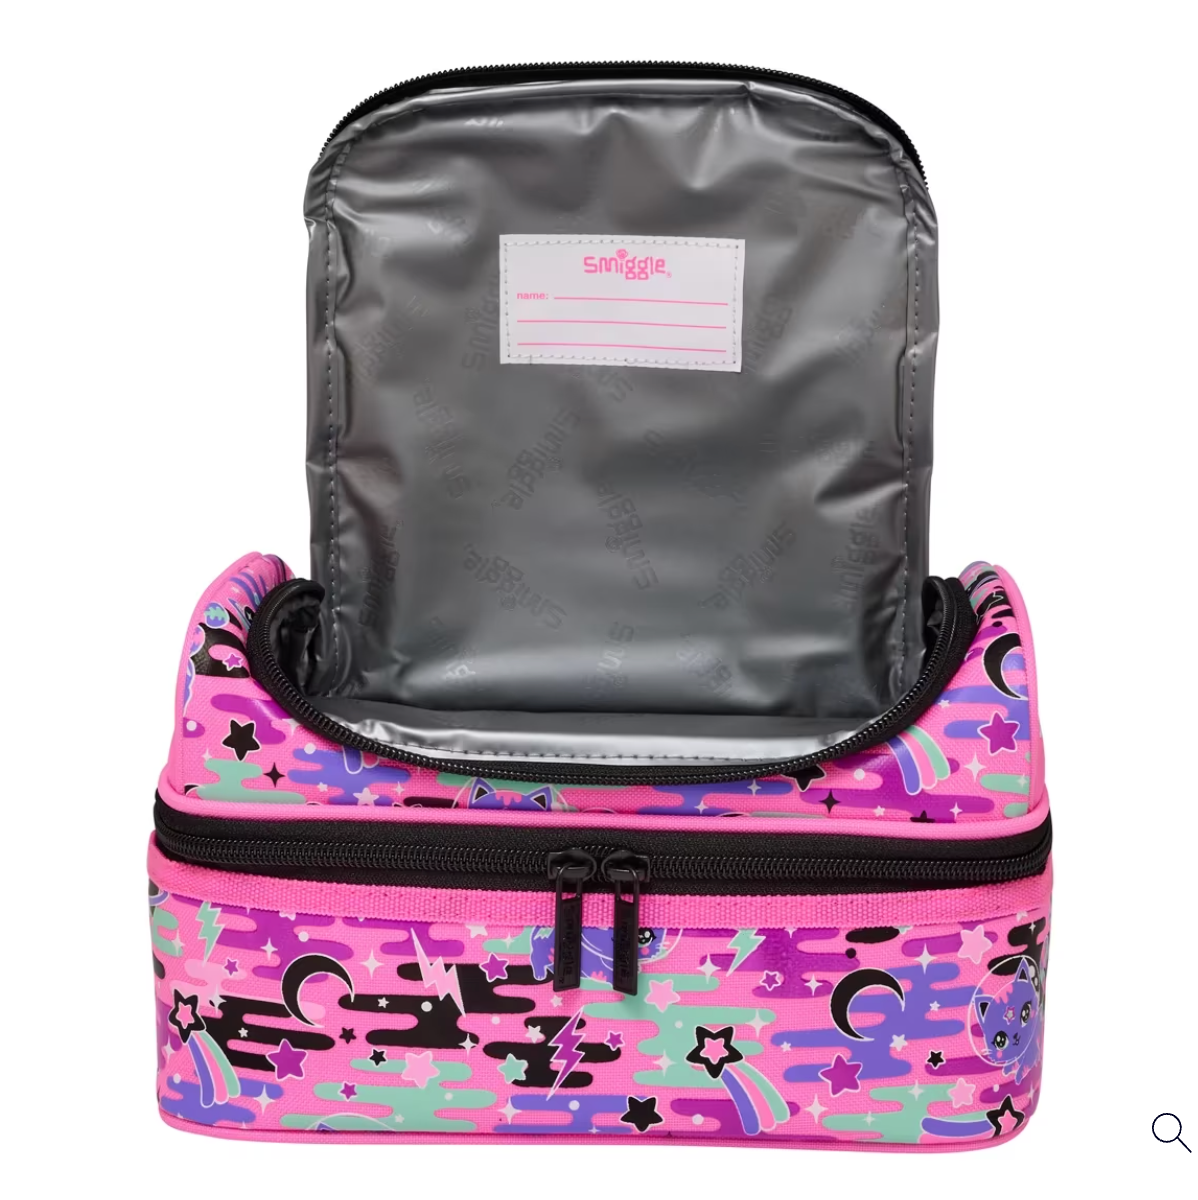 Smiggle Away Lunch Box Double Decker - Pink